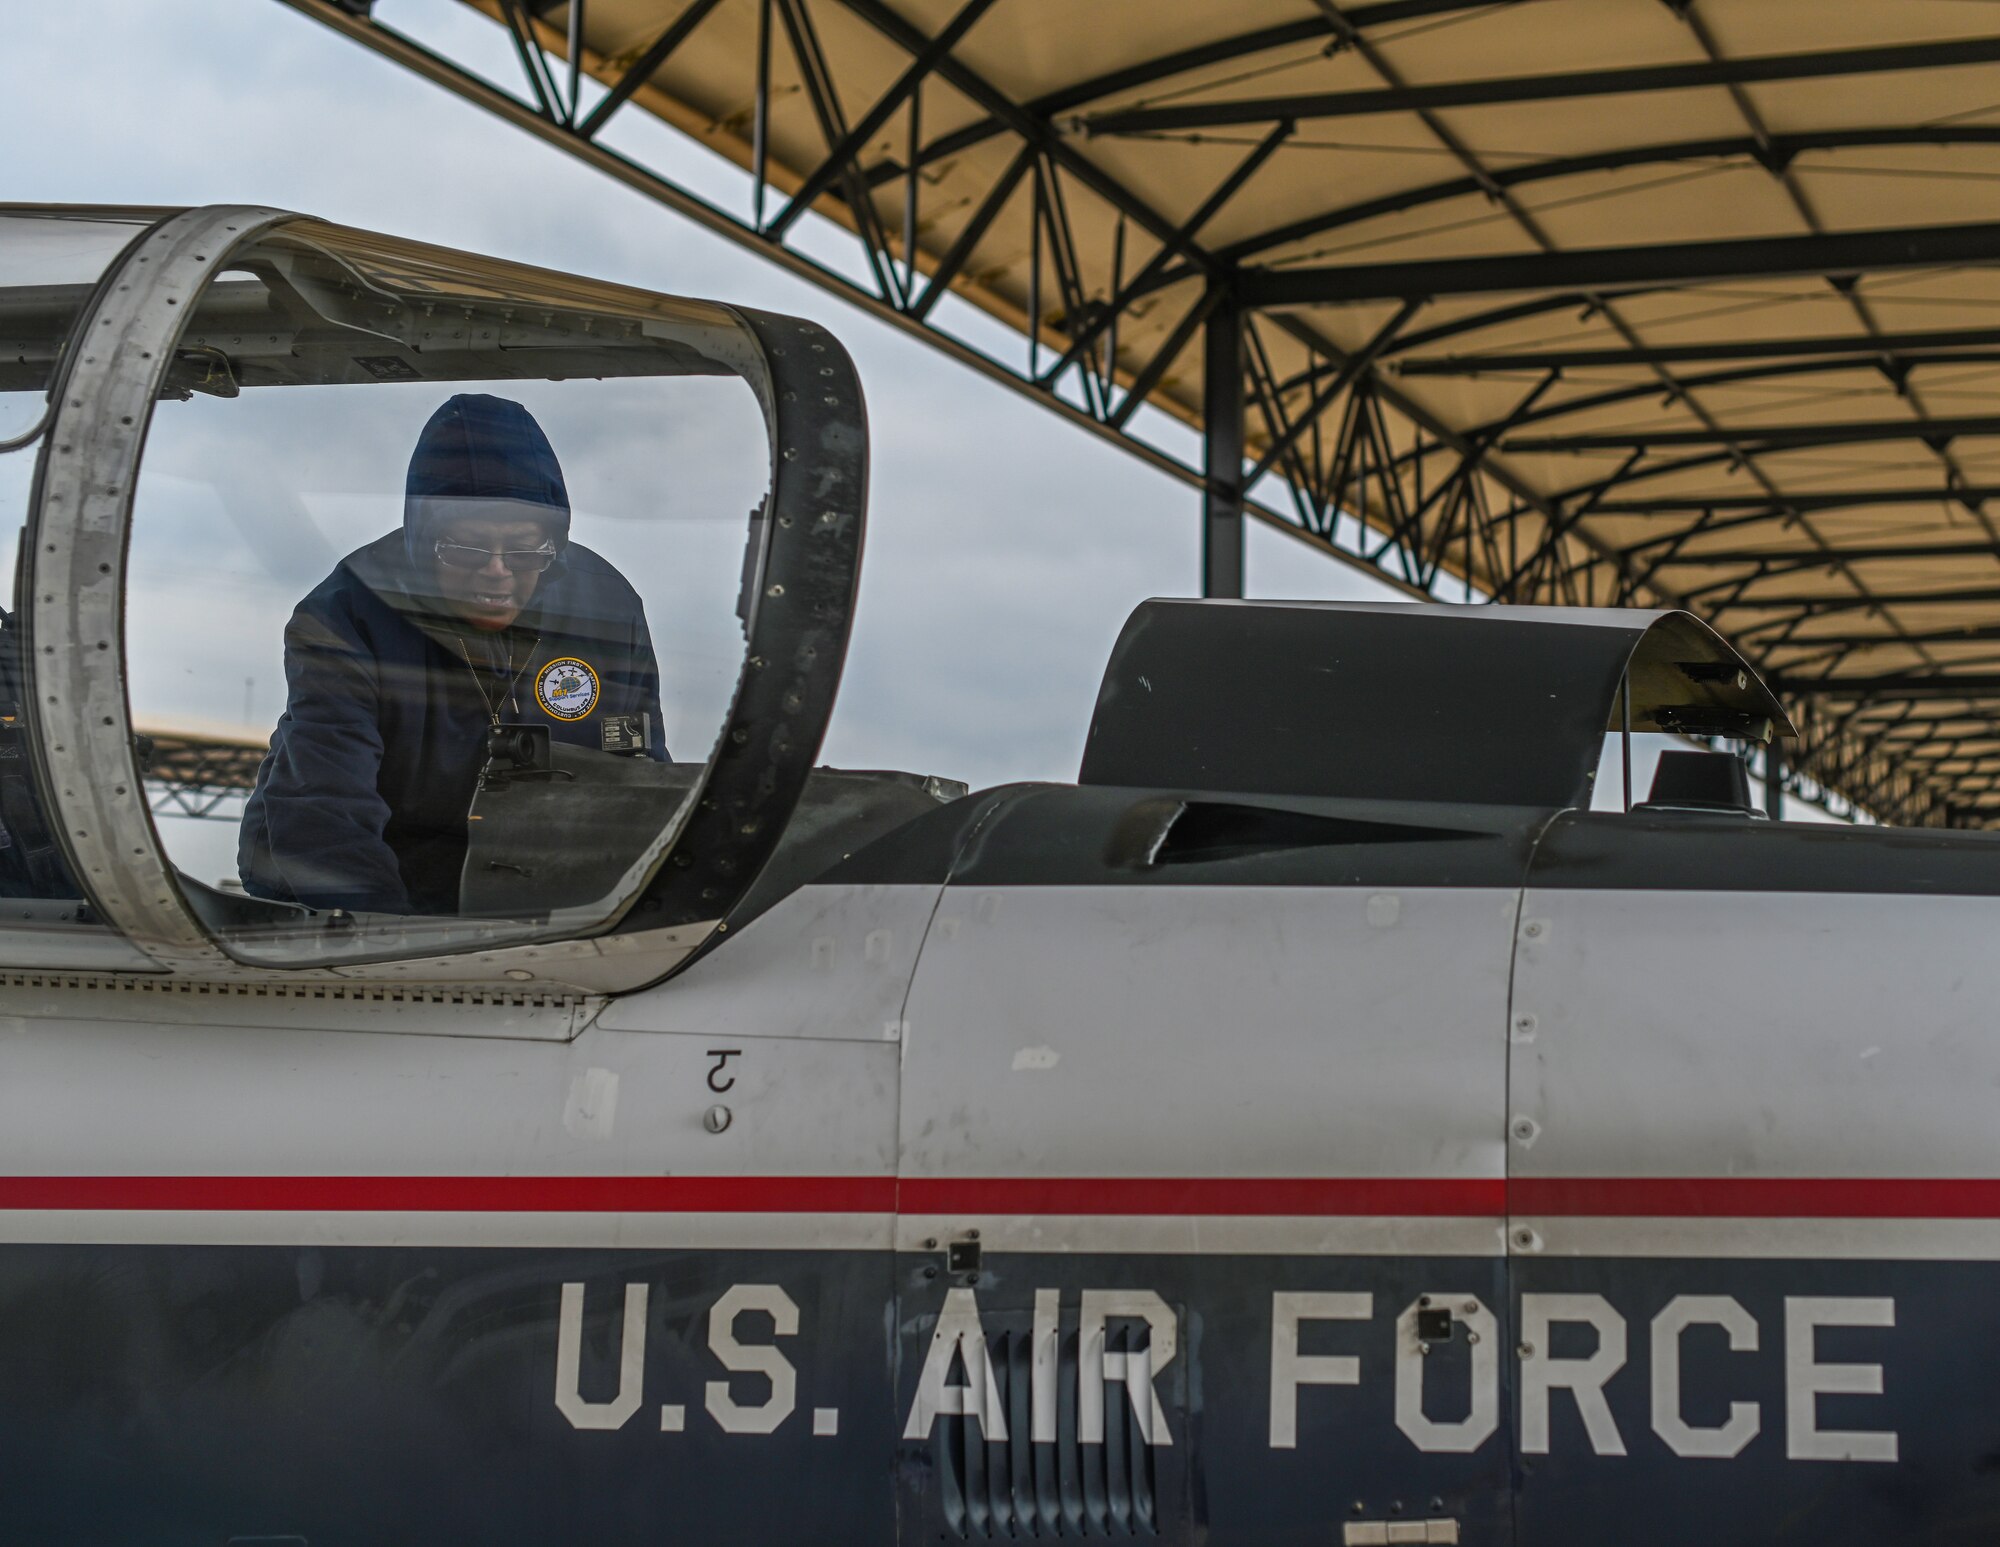 Charlotte Lindsey, M1 Support Services T-6A Texan II maintainer, prepares the cockpit of a T-6 on Oct. 30, 2020, at Columbus Air Force Base, Miss. The T-6 is fully aerobatic and features a pressurized cockpit with an anti-G system, ejection seat and an advanced avionics package with sunlight-readable liquid crystal displays. (U.S. Air Force photo by Airman 1st Class Davis Donaldson)